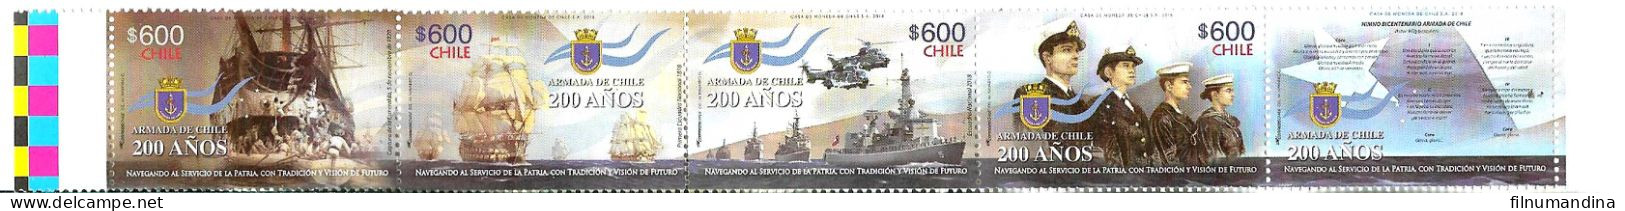 #2612 CHILE 2018 MILITARIA CHILEAN NAVY 200° ANIV SHIPS AIRPLANES STRIP WITH LABEL YV 2134-7 MNH - Cile